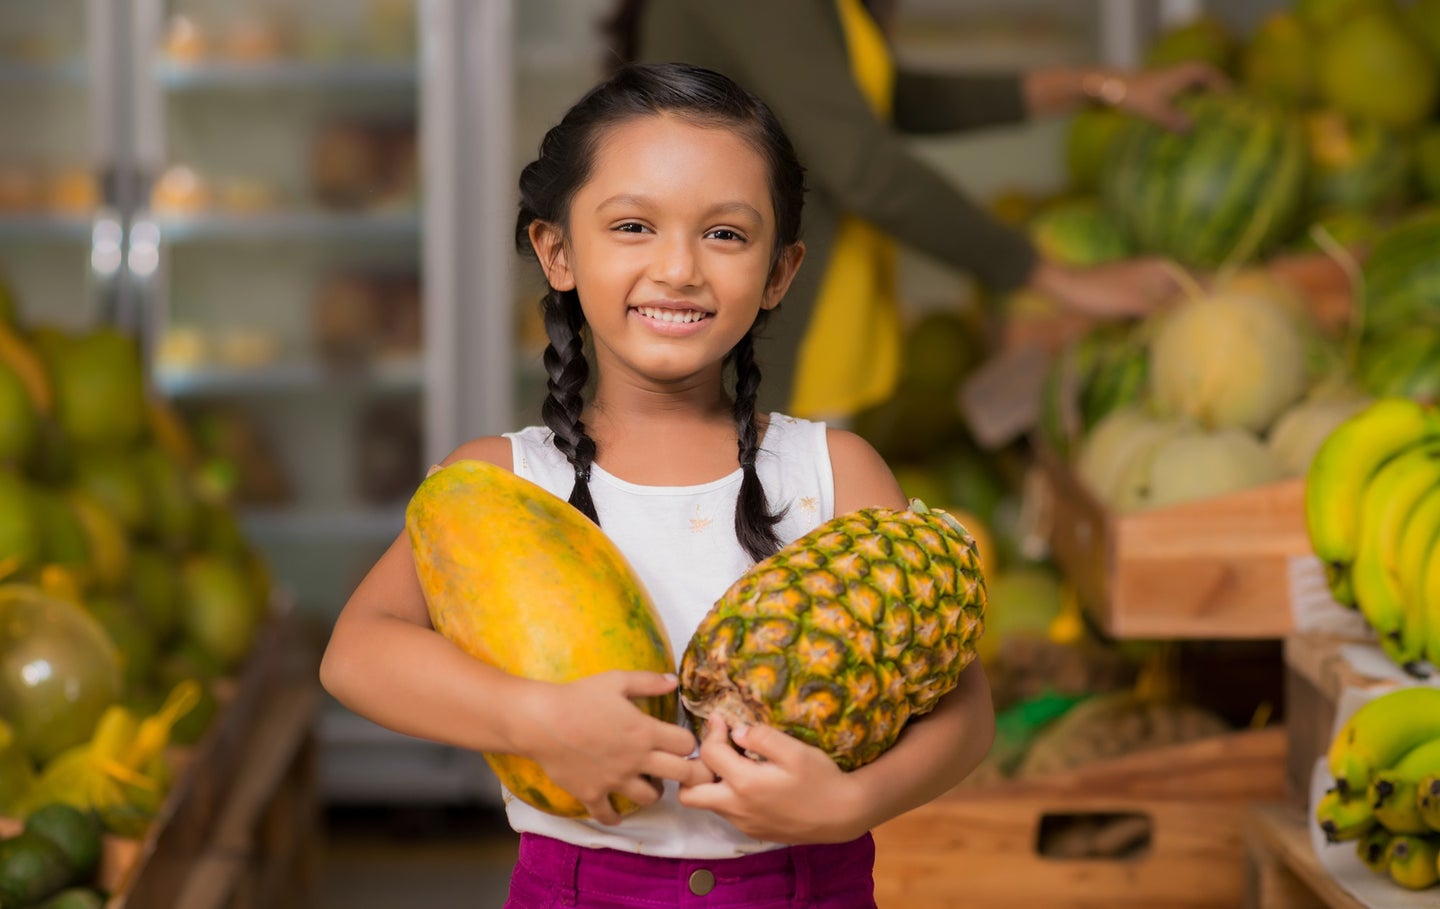 Brown-skinned child with black braids at the grocery store holding ripe fruit like pineapple and papaya in arms